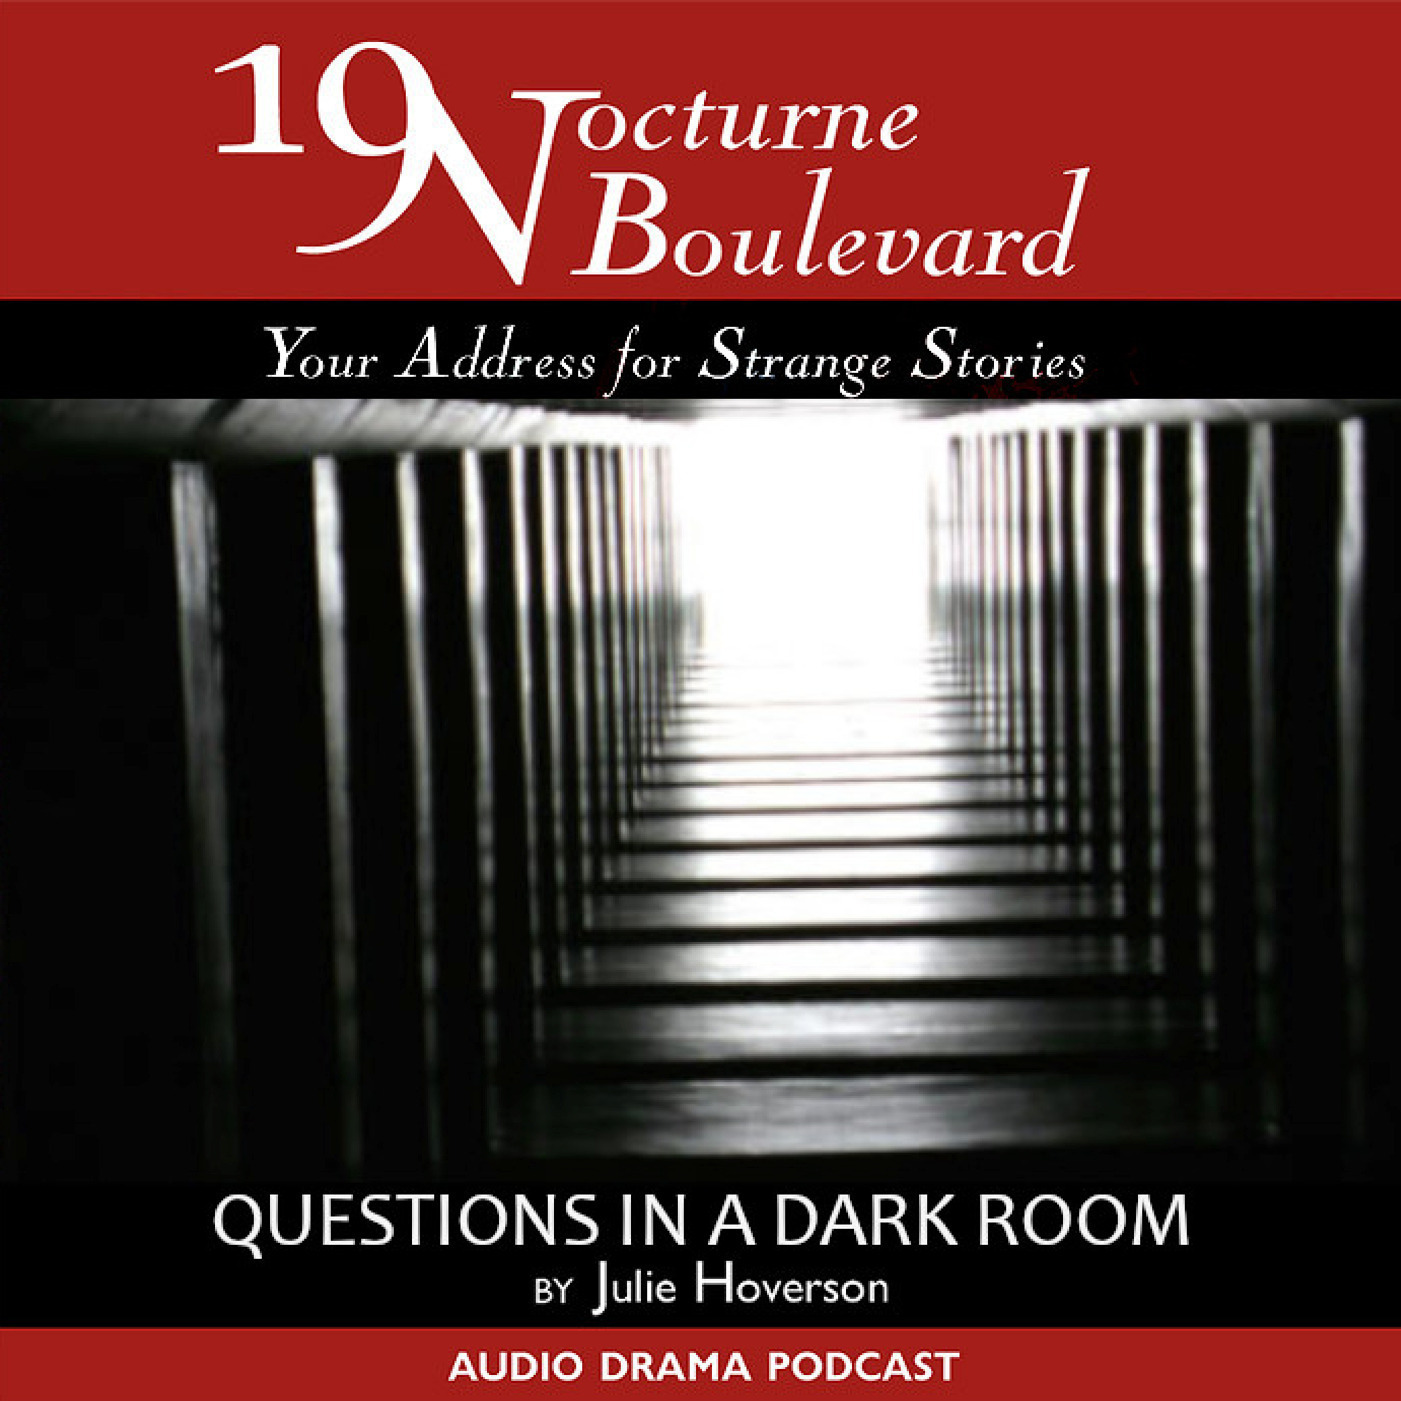 Questions In a Dark Room